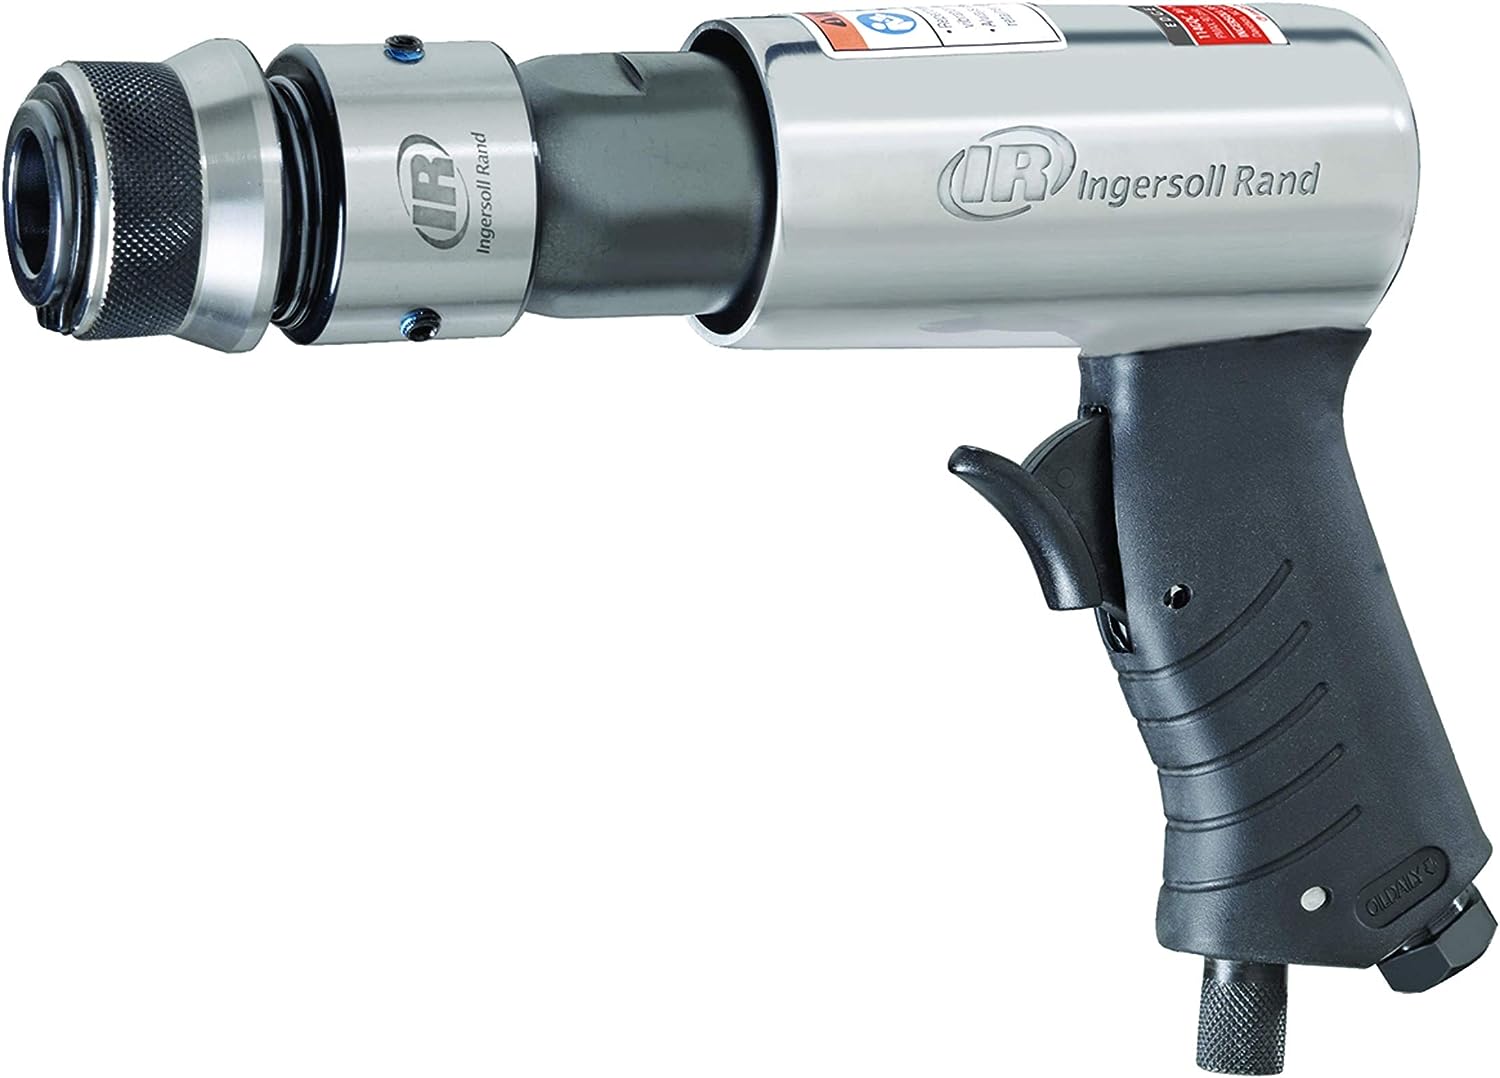 Ingersoll Rand 114GQC Air Hammer - 3 PC Chisel Set with Tapered Punch, Panel Cutter, Flat Chisel, 2-5/8 Inch stroke, 3500 BPM, Lightweight, Compact, Gray